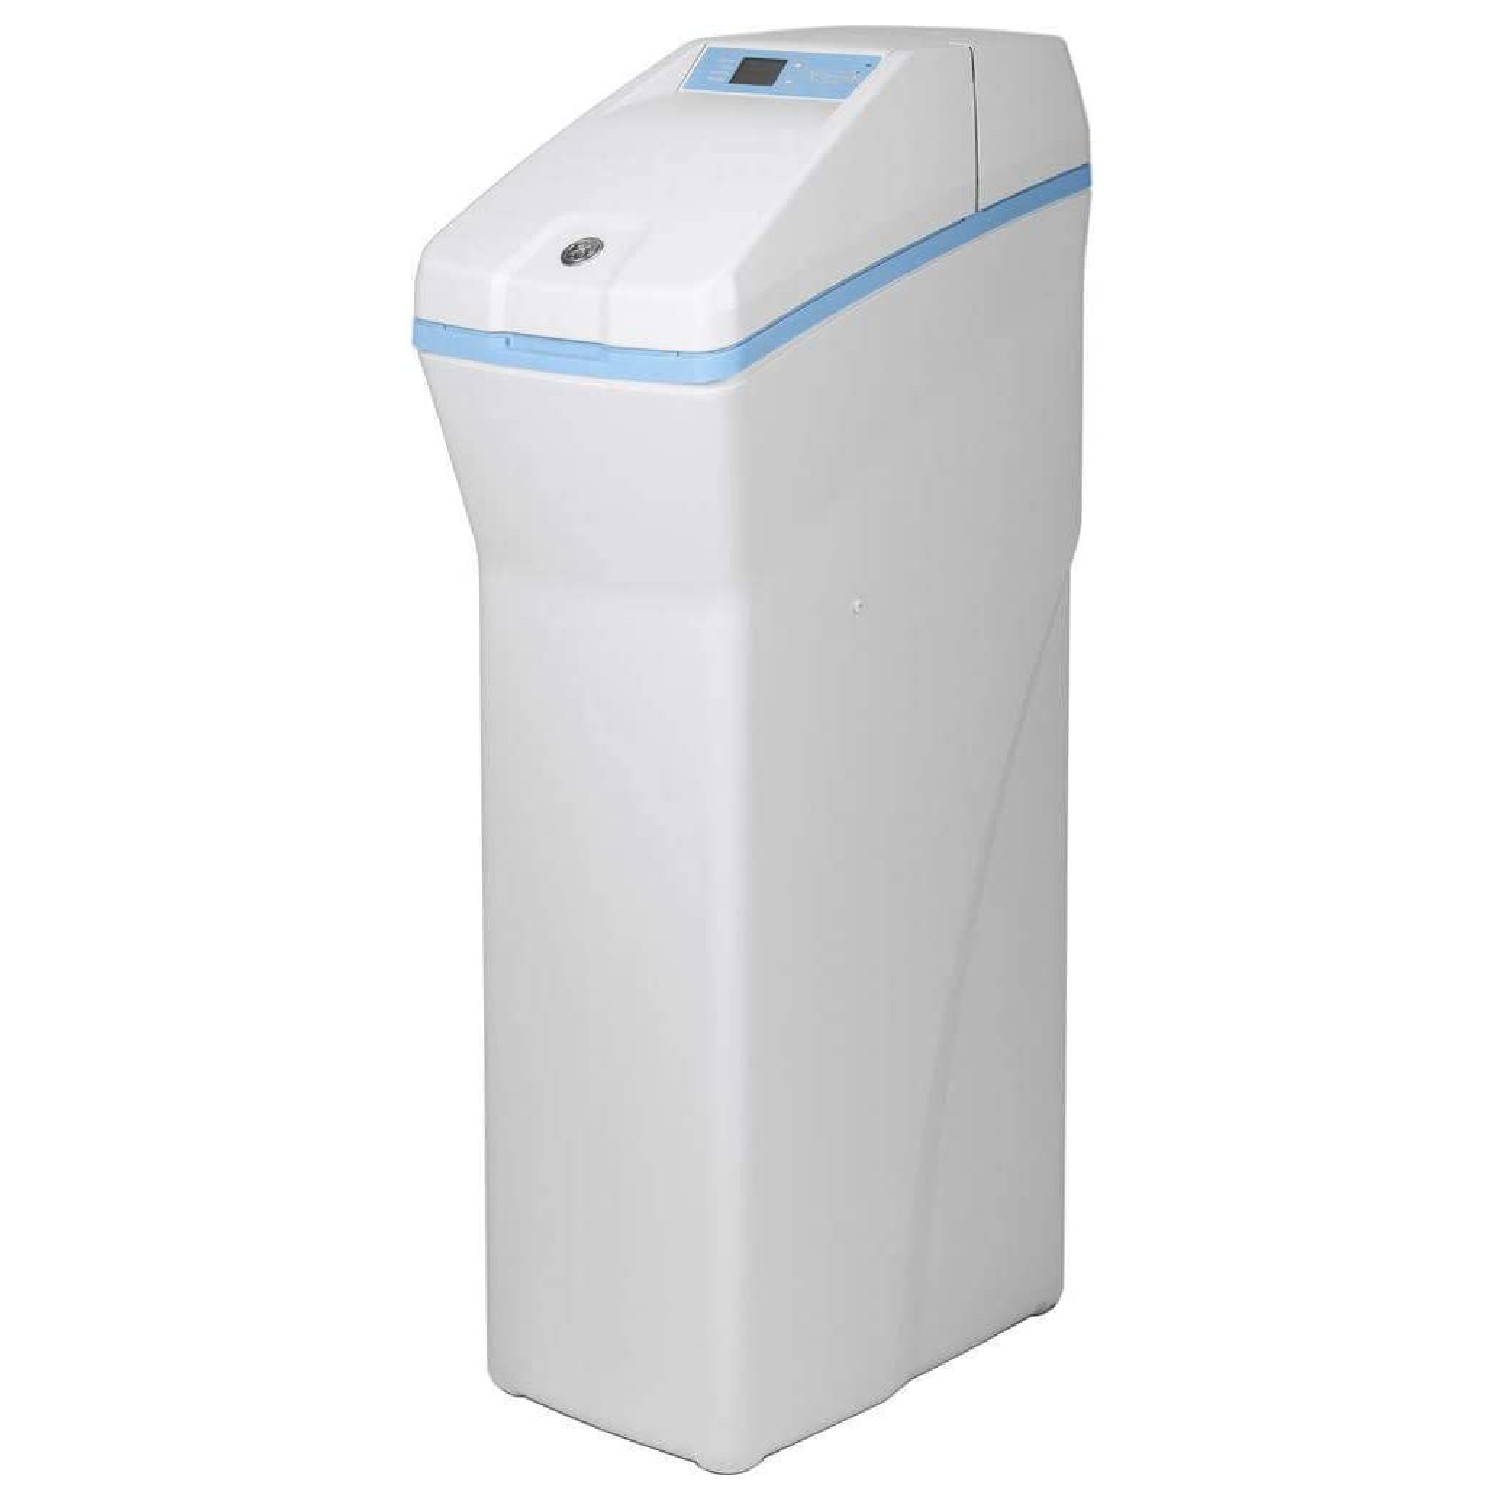 11 Best Water Softeners for Your Home (2021)